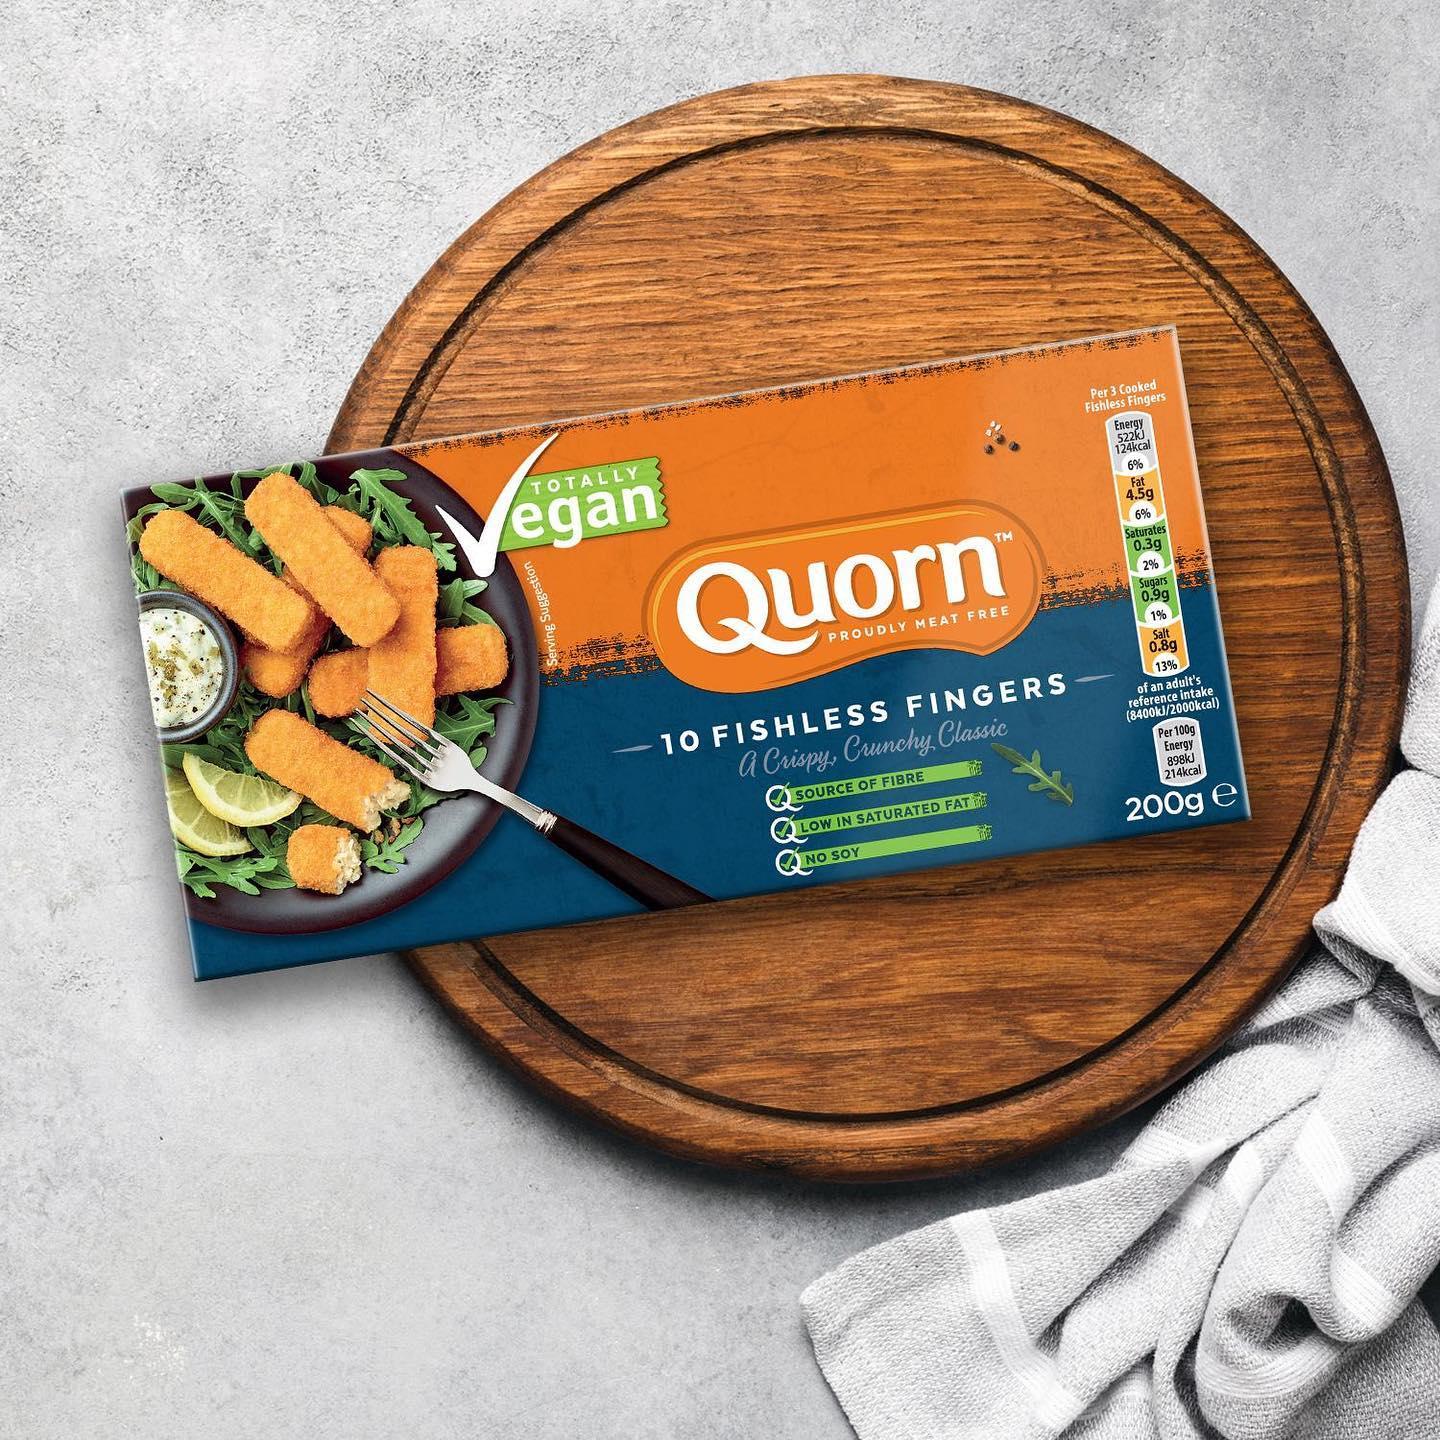 Quorn Fishless Fingers with brand consulting and repositioning strategy